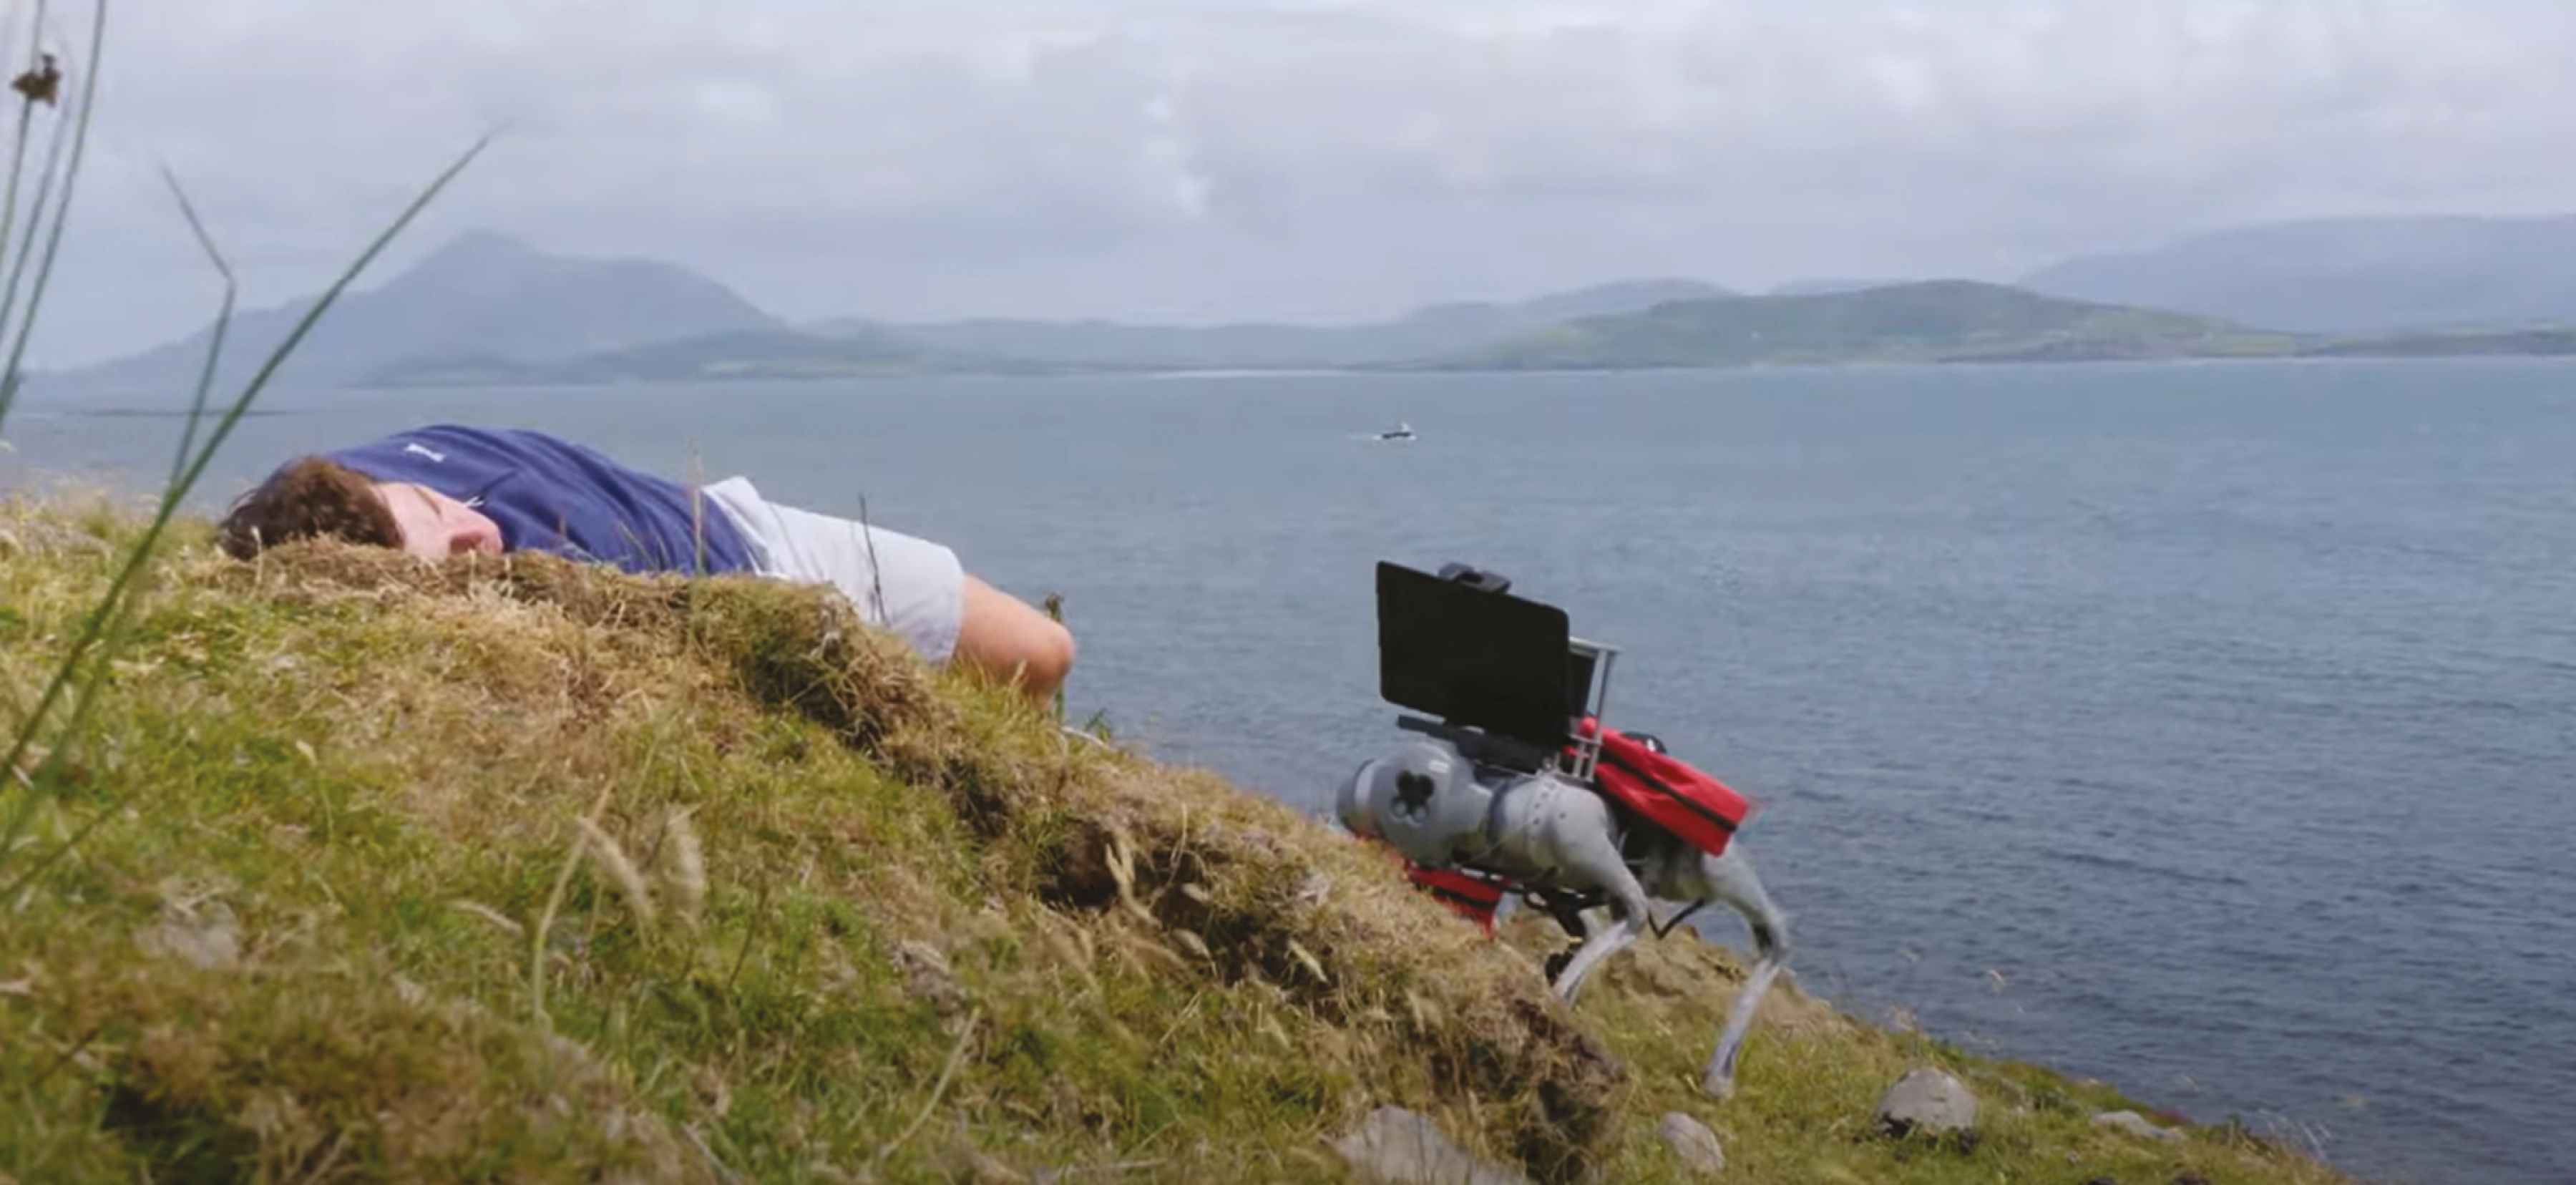 Robot dog achieving a triage beside an unconscious person (actor), Clare Island